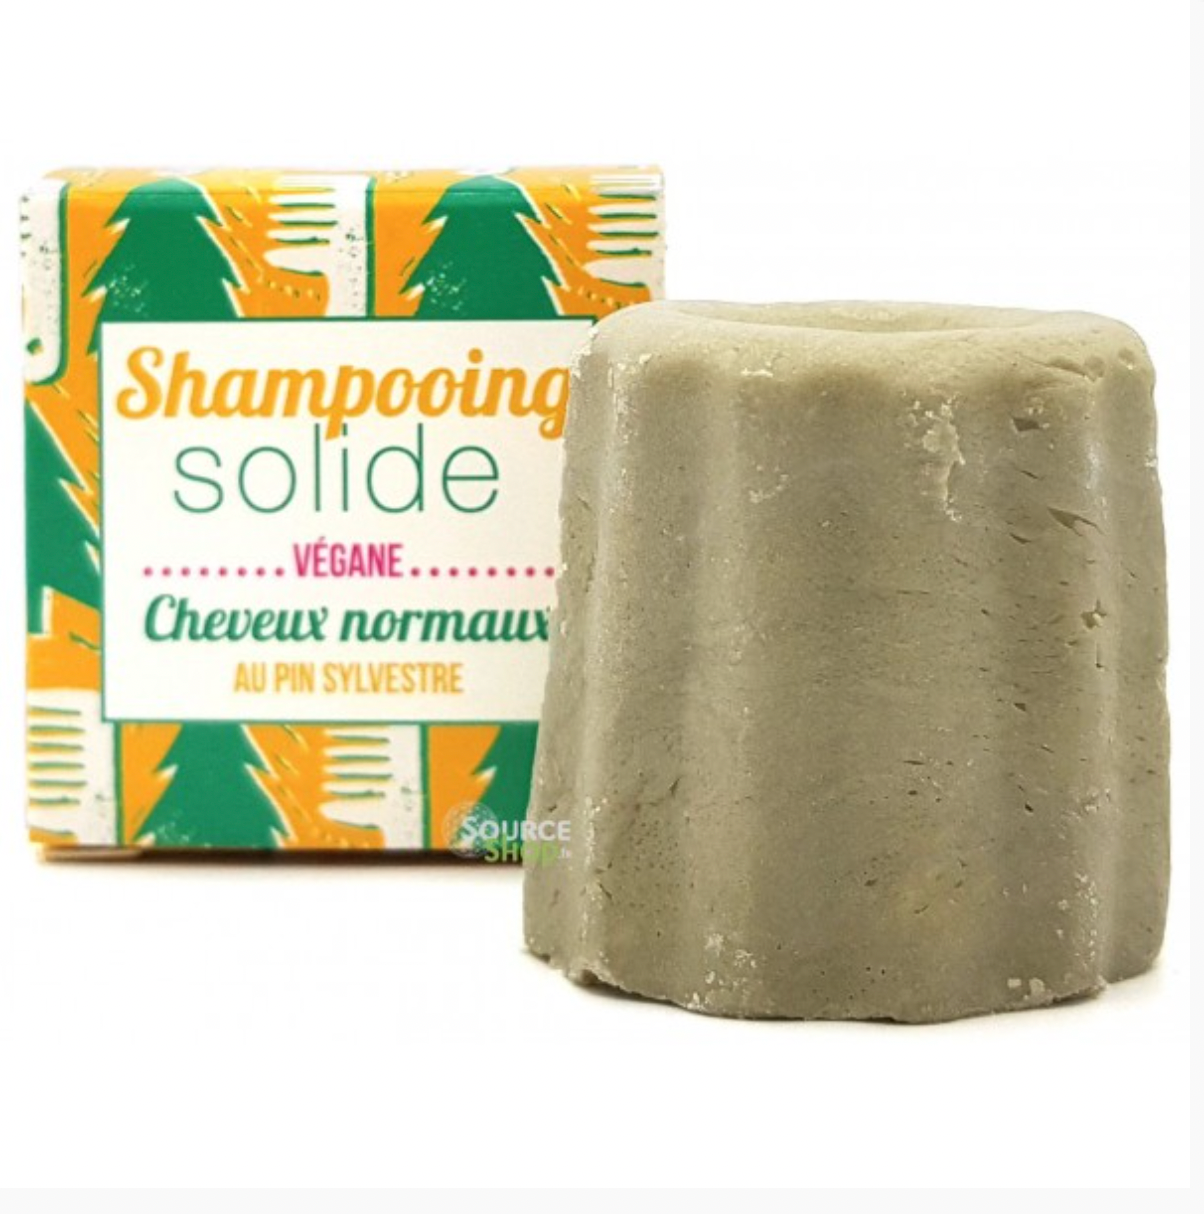 Shampoing cheveux normaux - Pin sylvestre